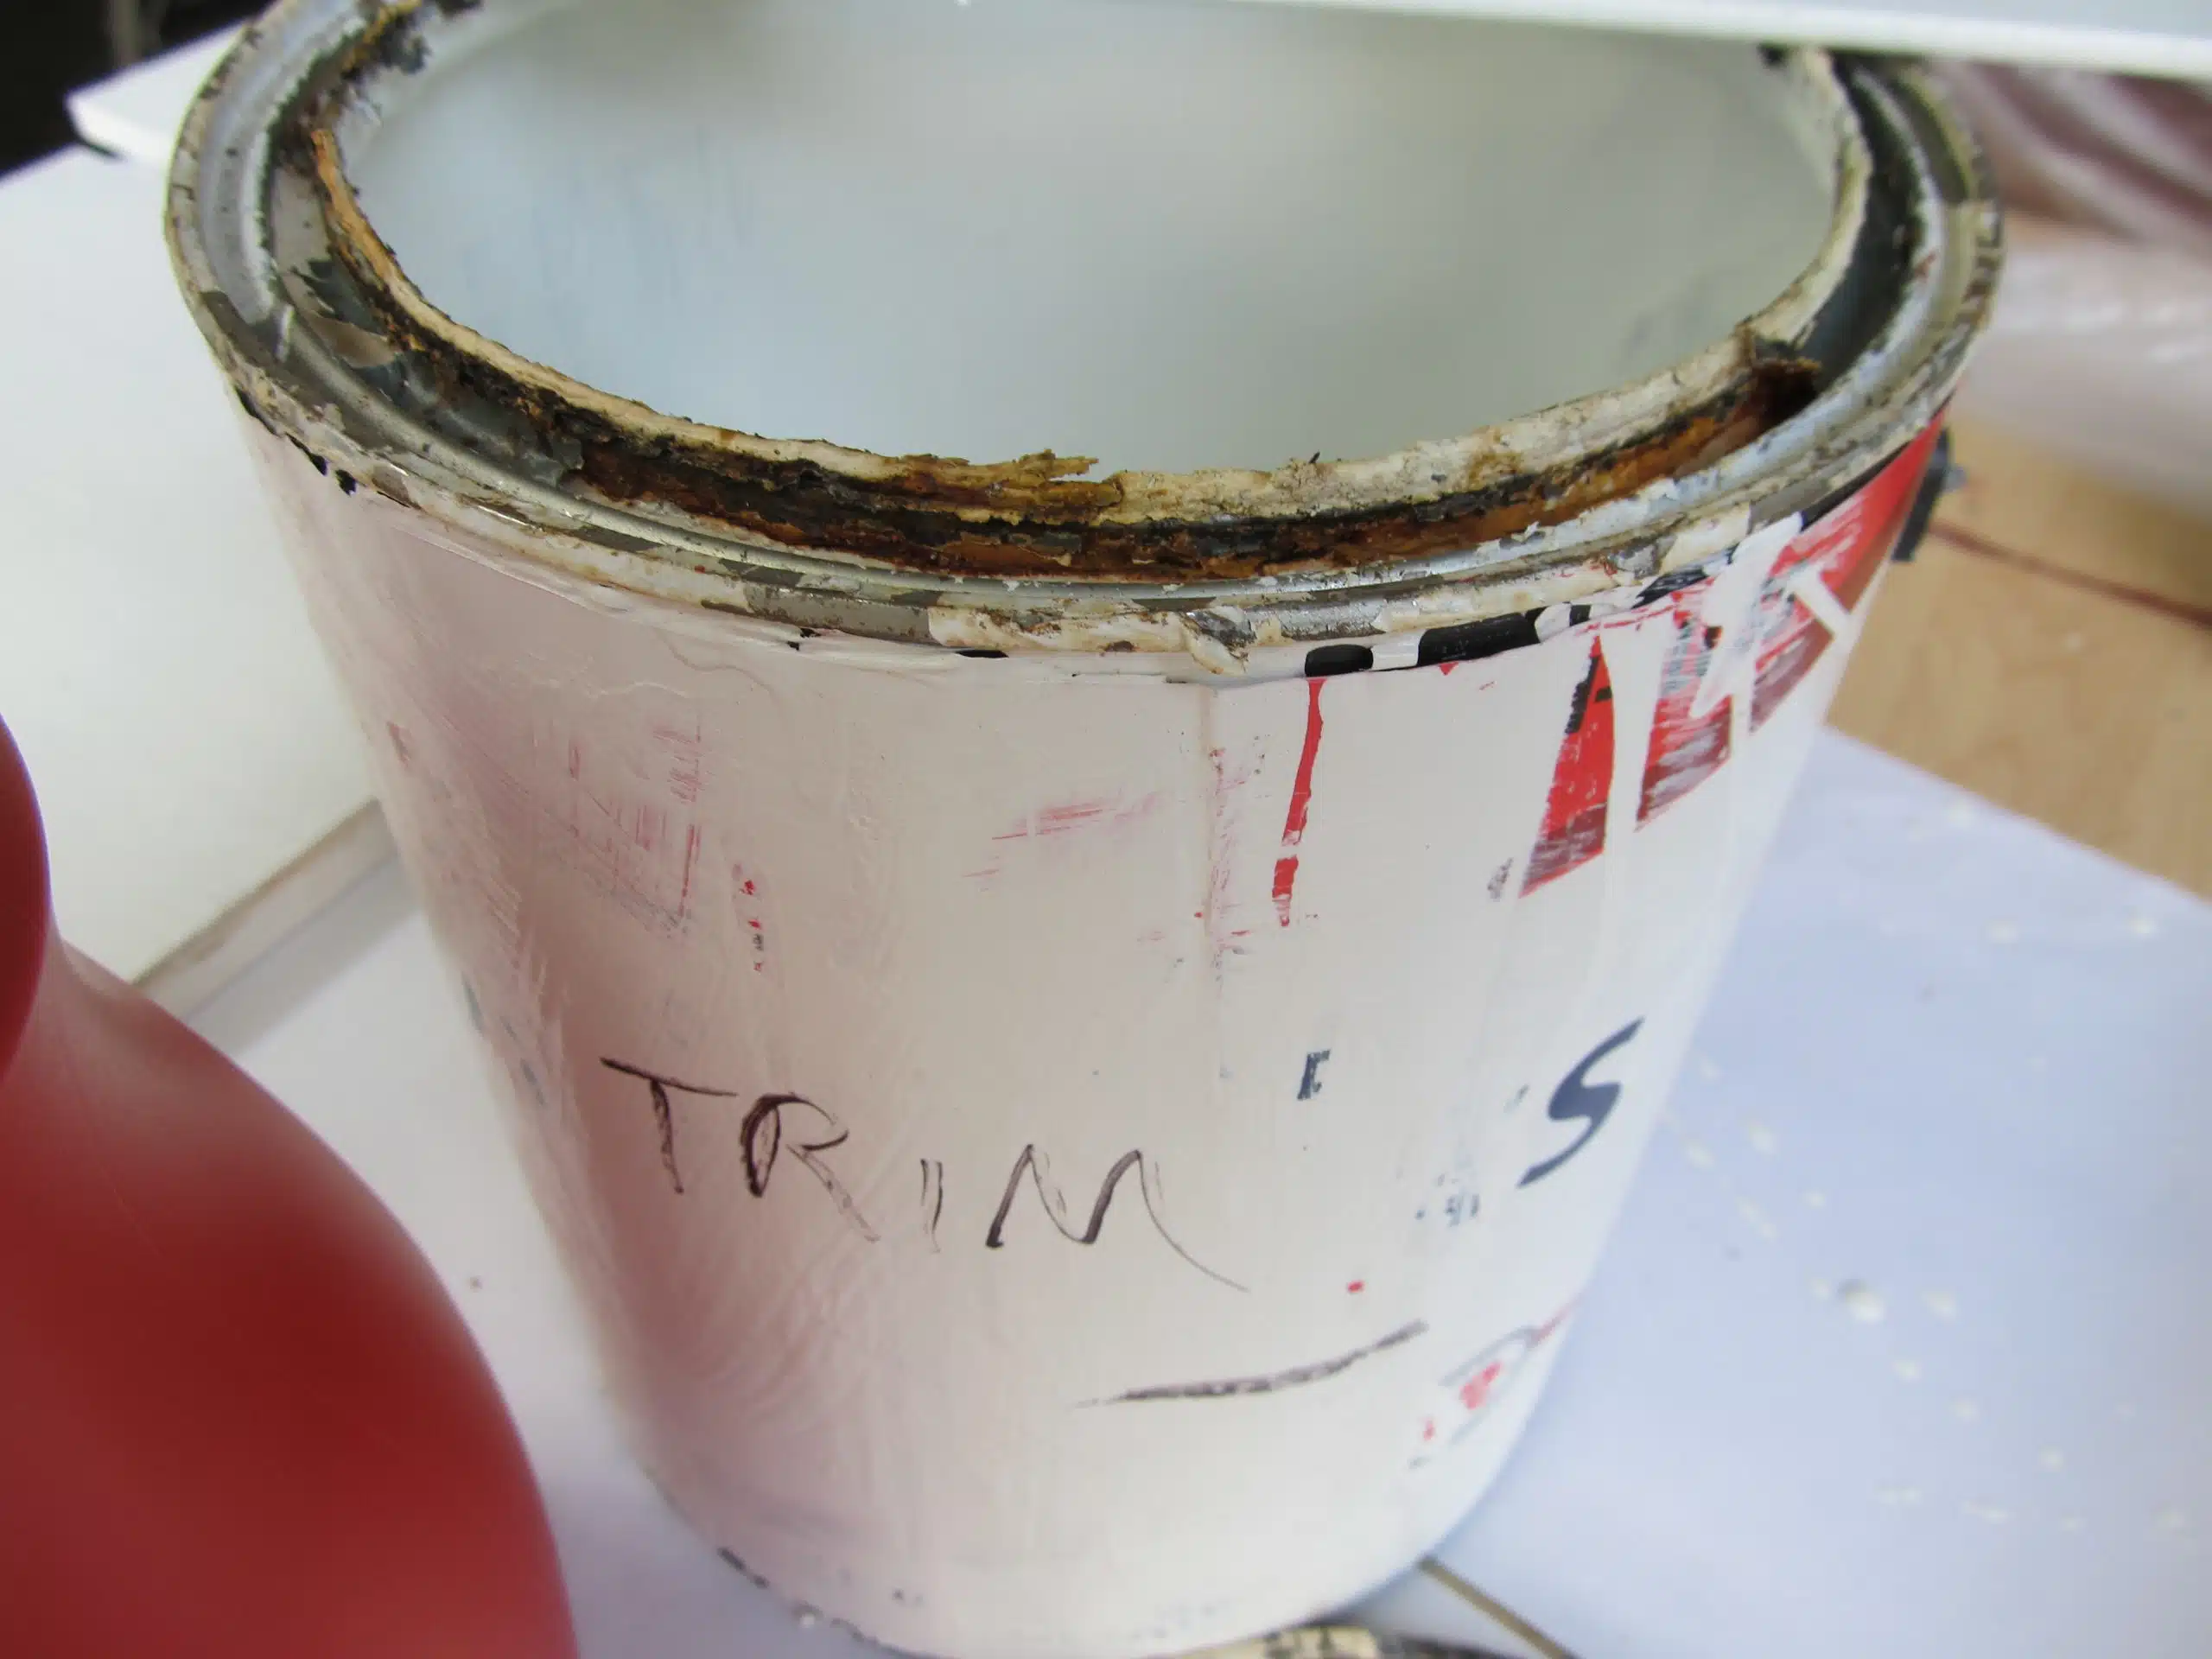 How to deal with rusted paint cans - My Repurposed Life®